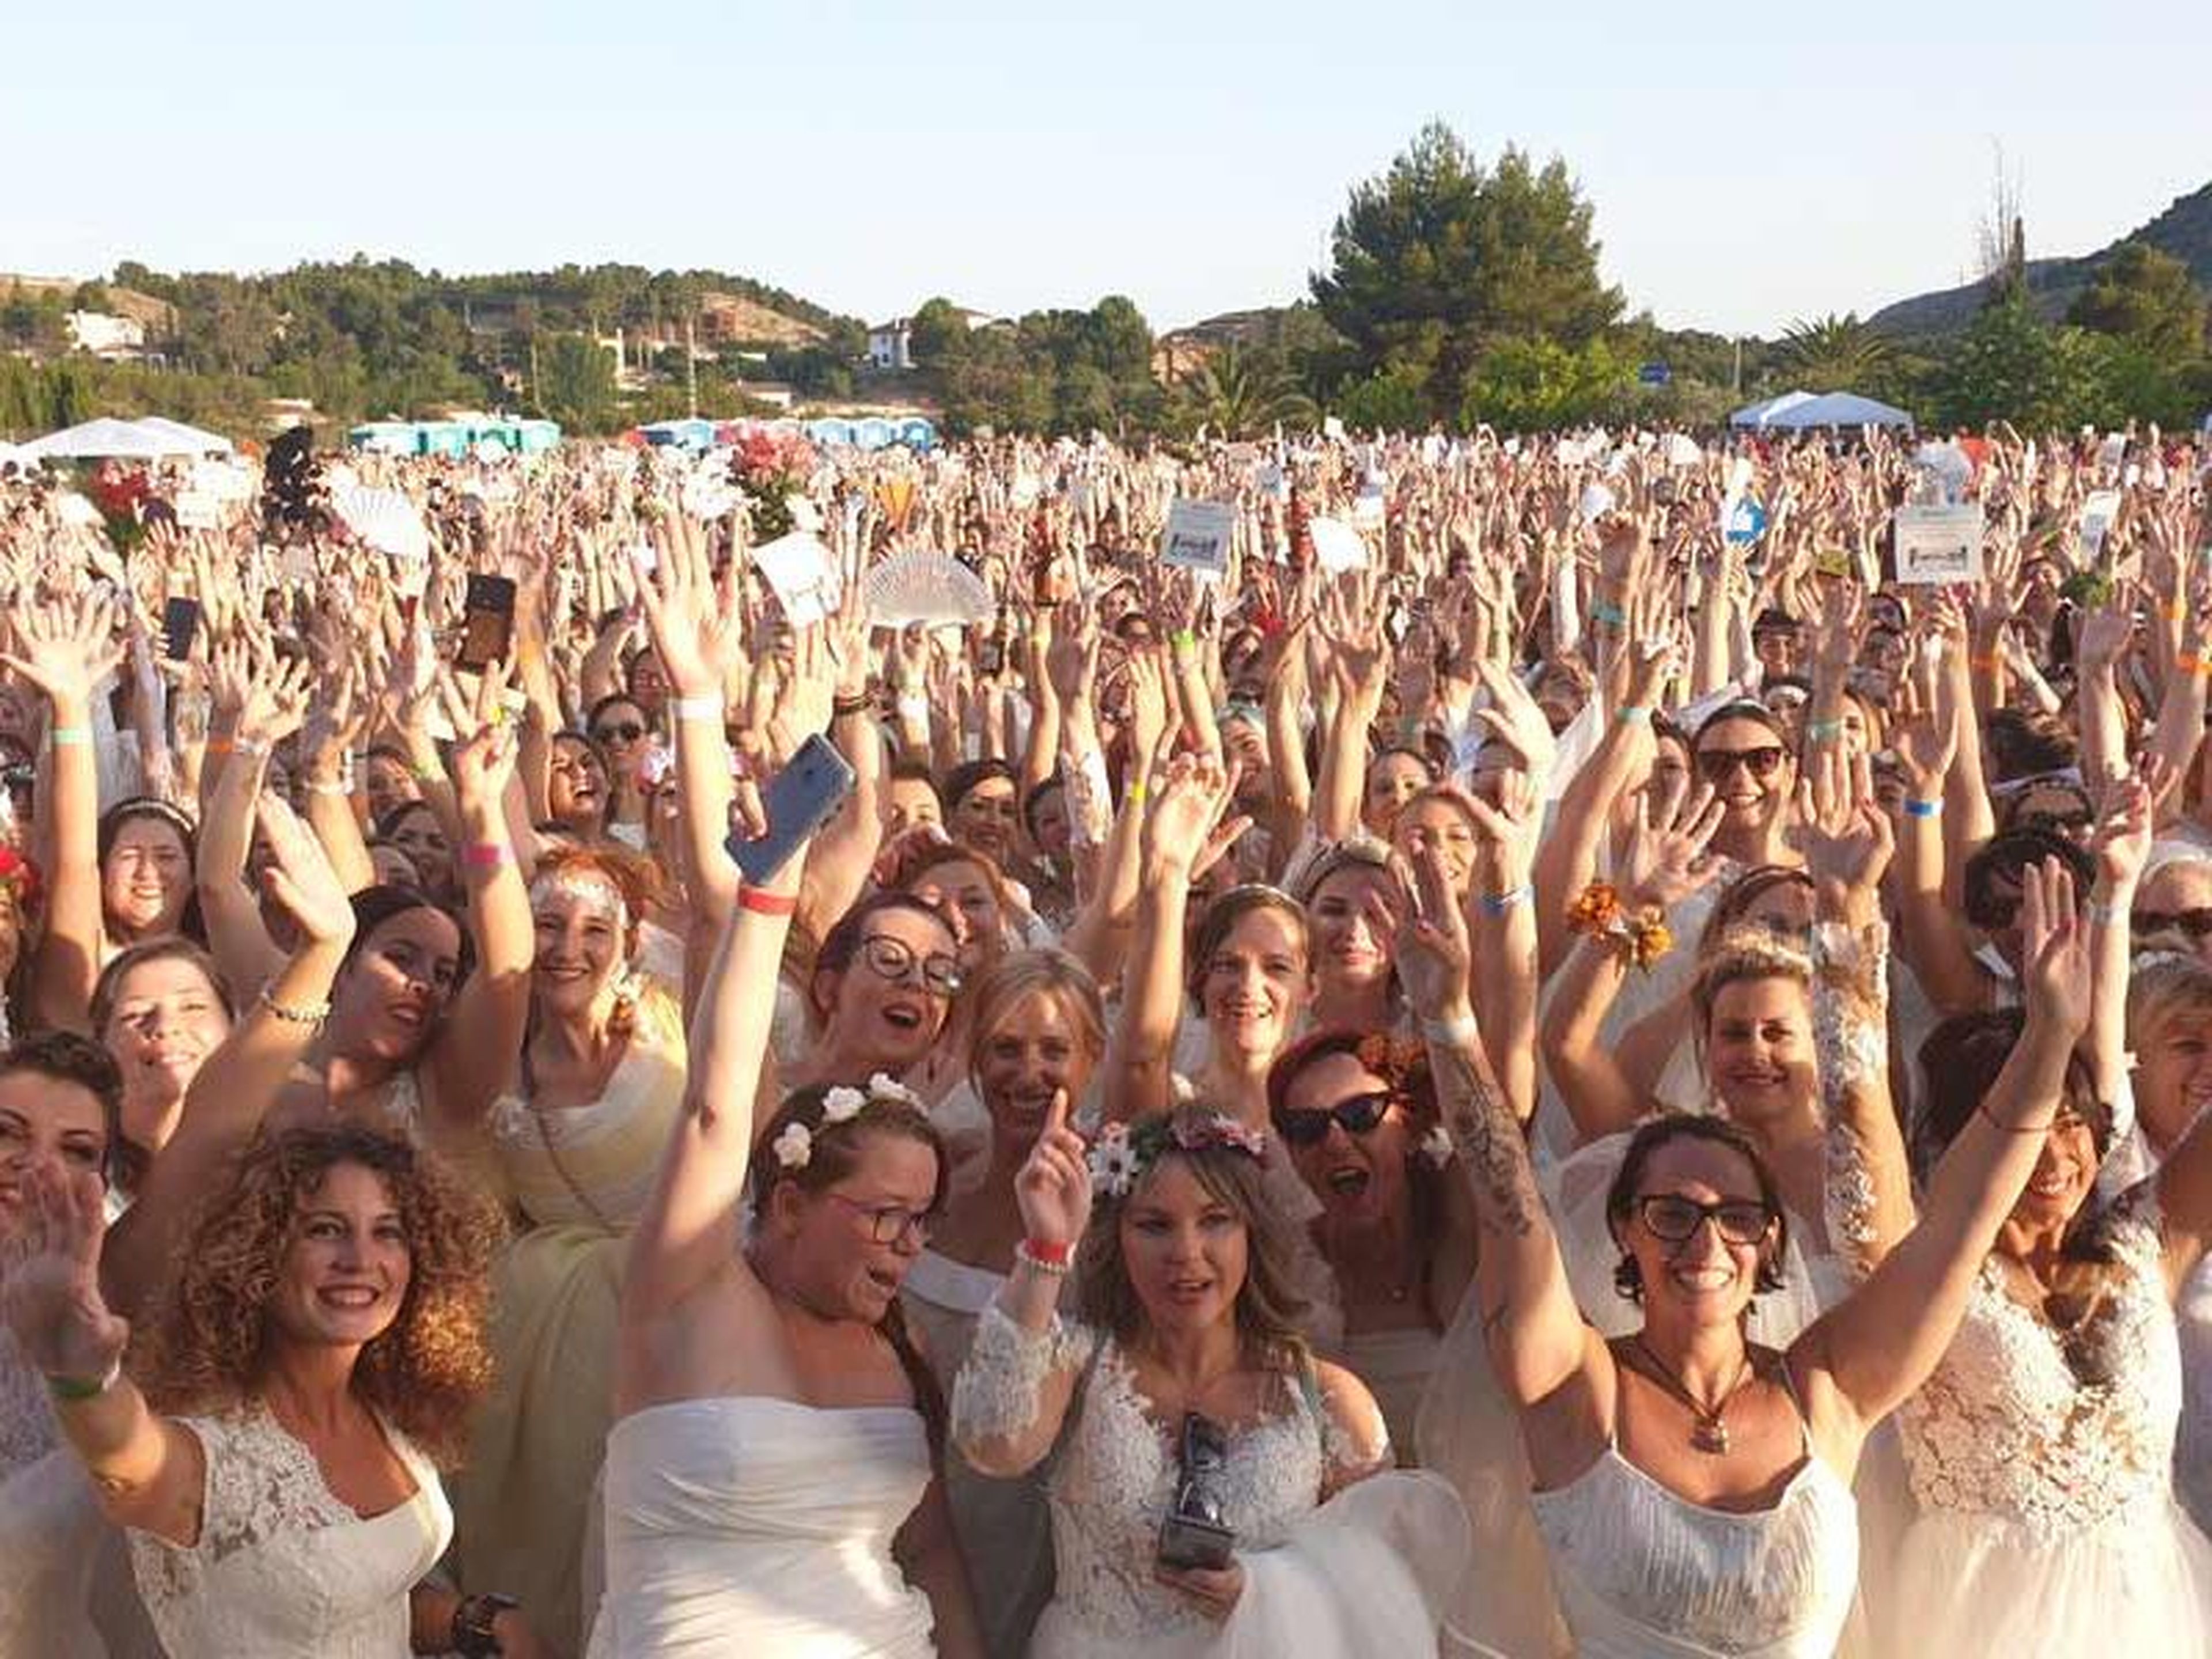 The largest gathering of people dressed as brides.